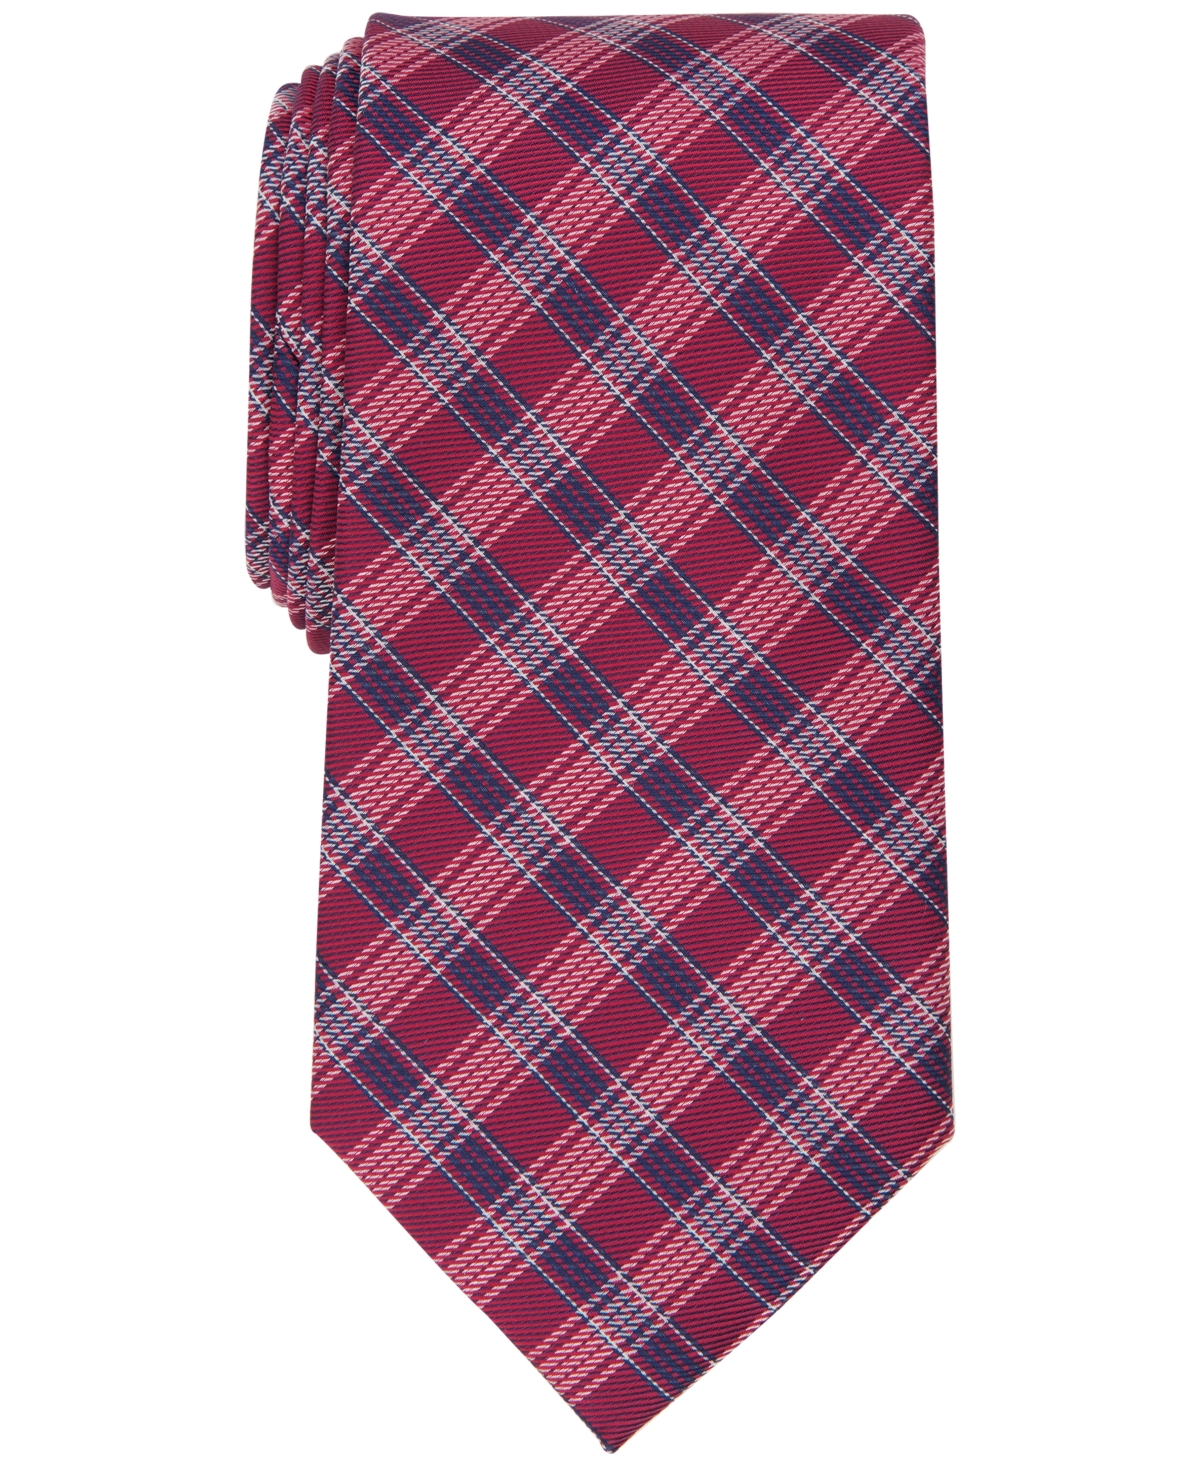 Men's Cates Plaid Tie, Created for Macy's - Yellow